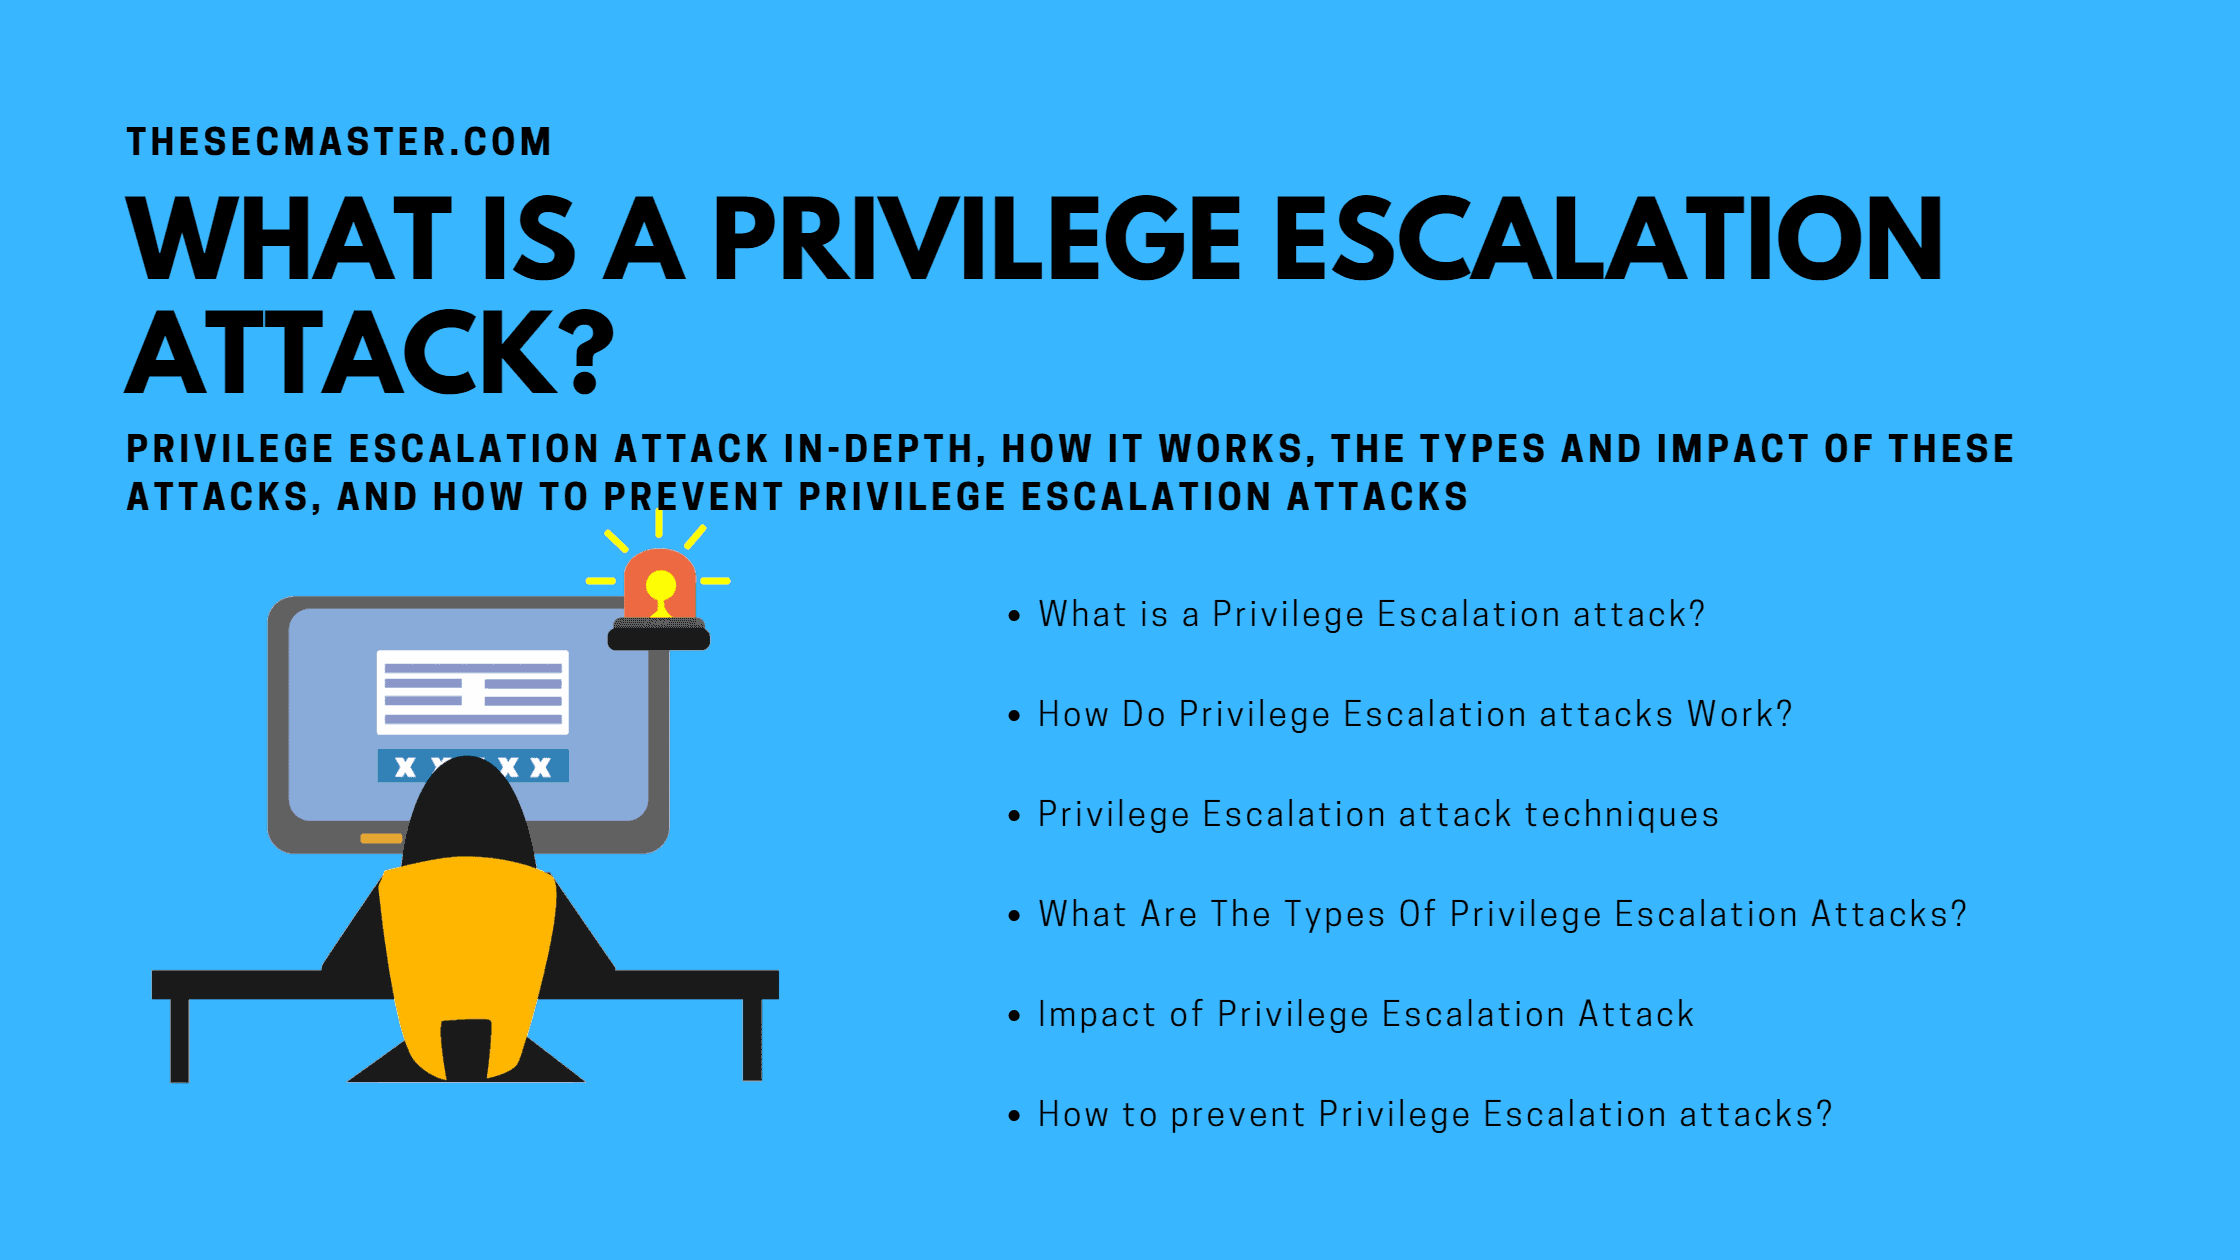 What Is A Privilege Escalation Attack And How To Prevent Privilege Escalation Attacks